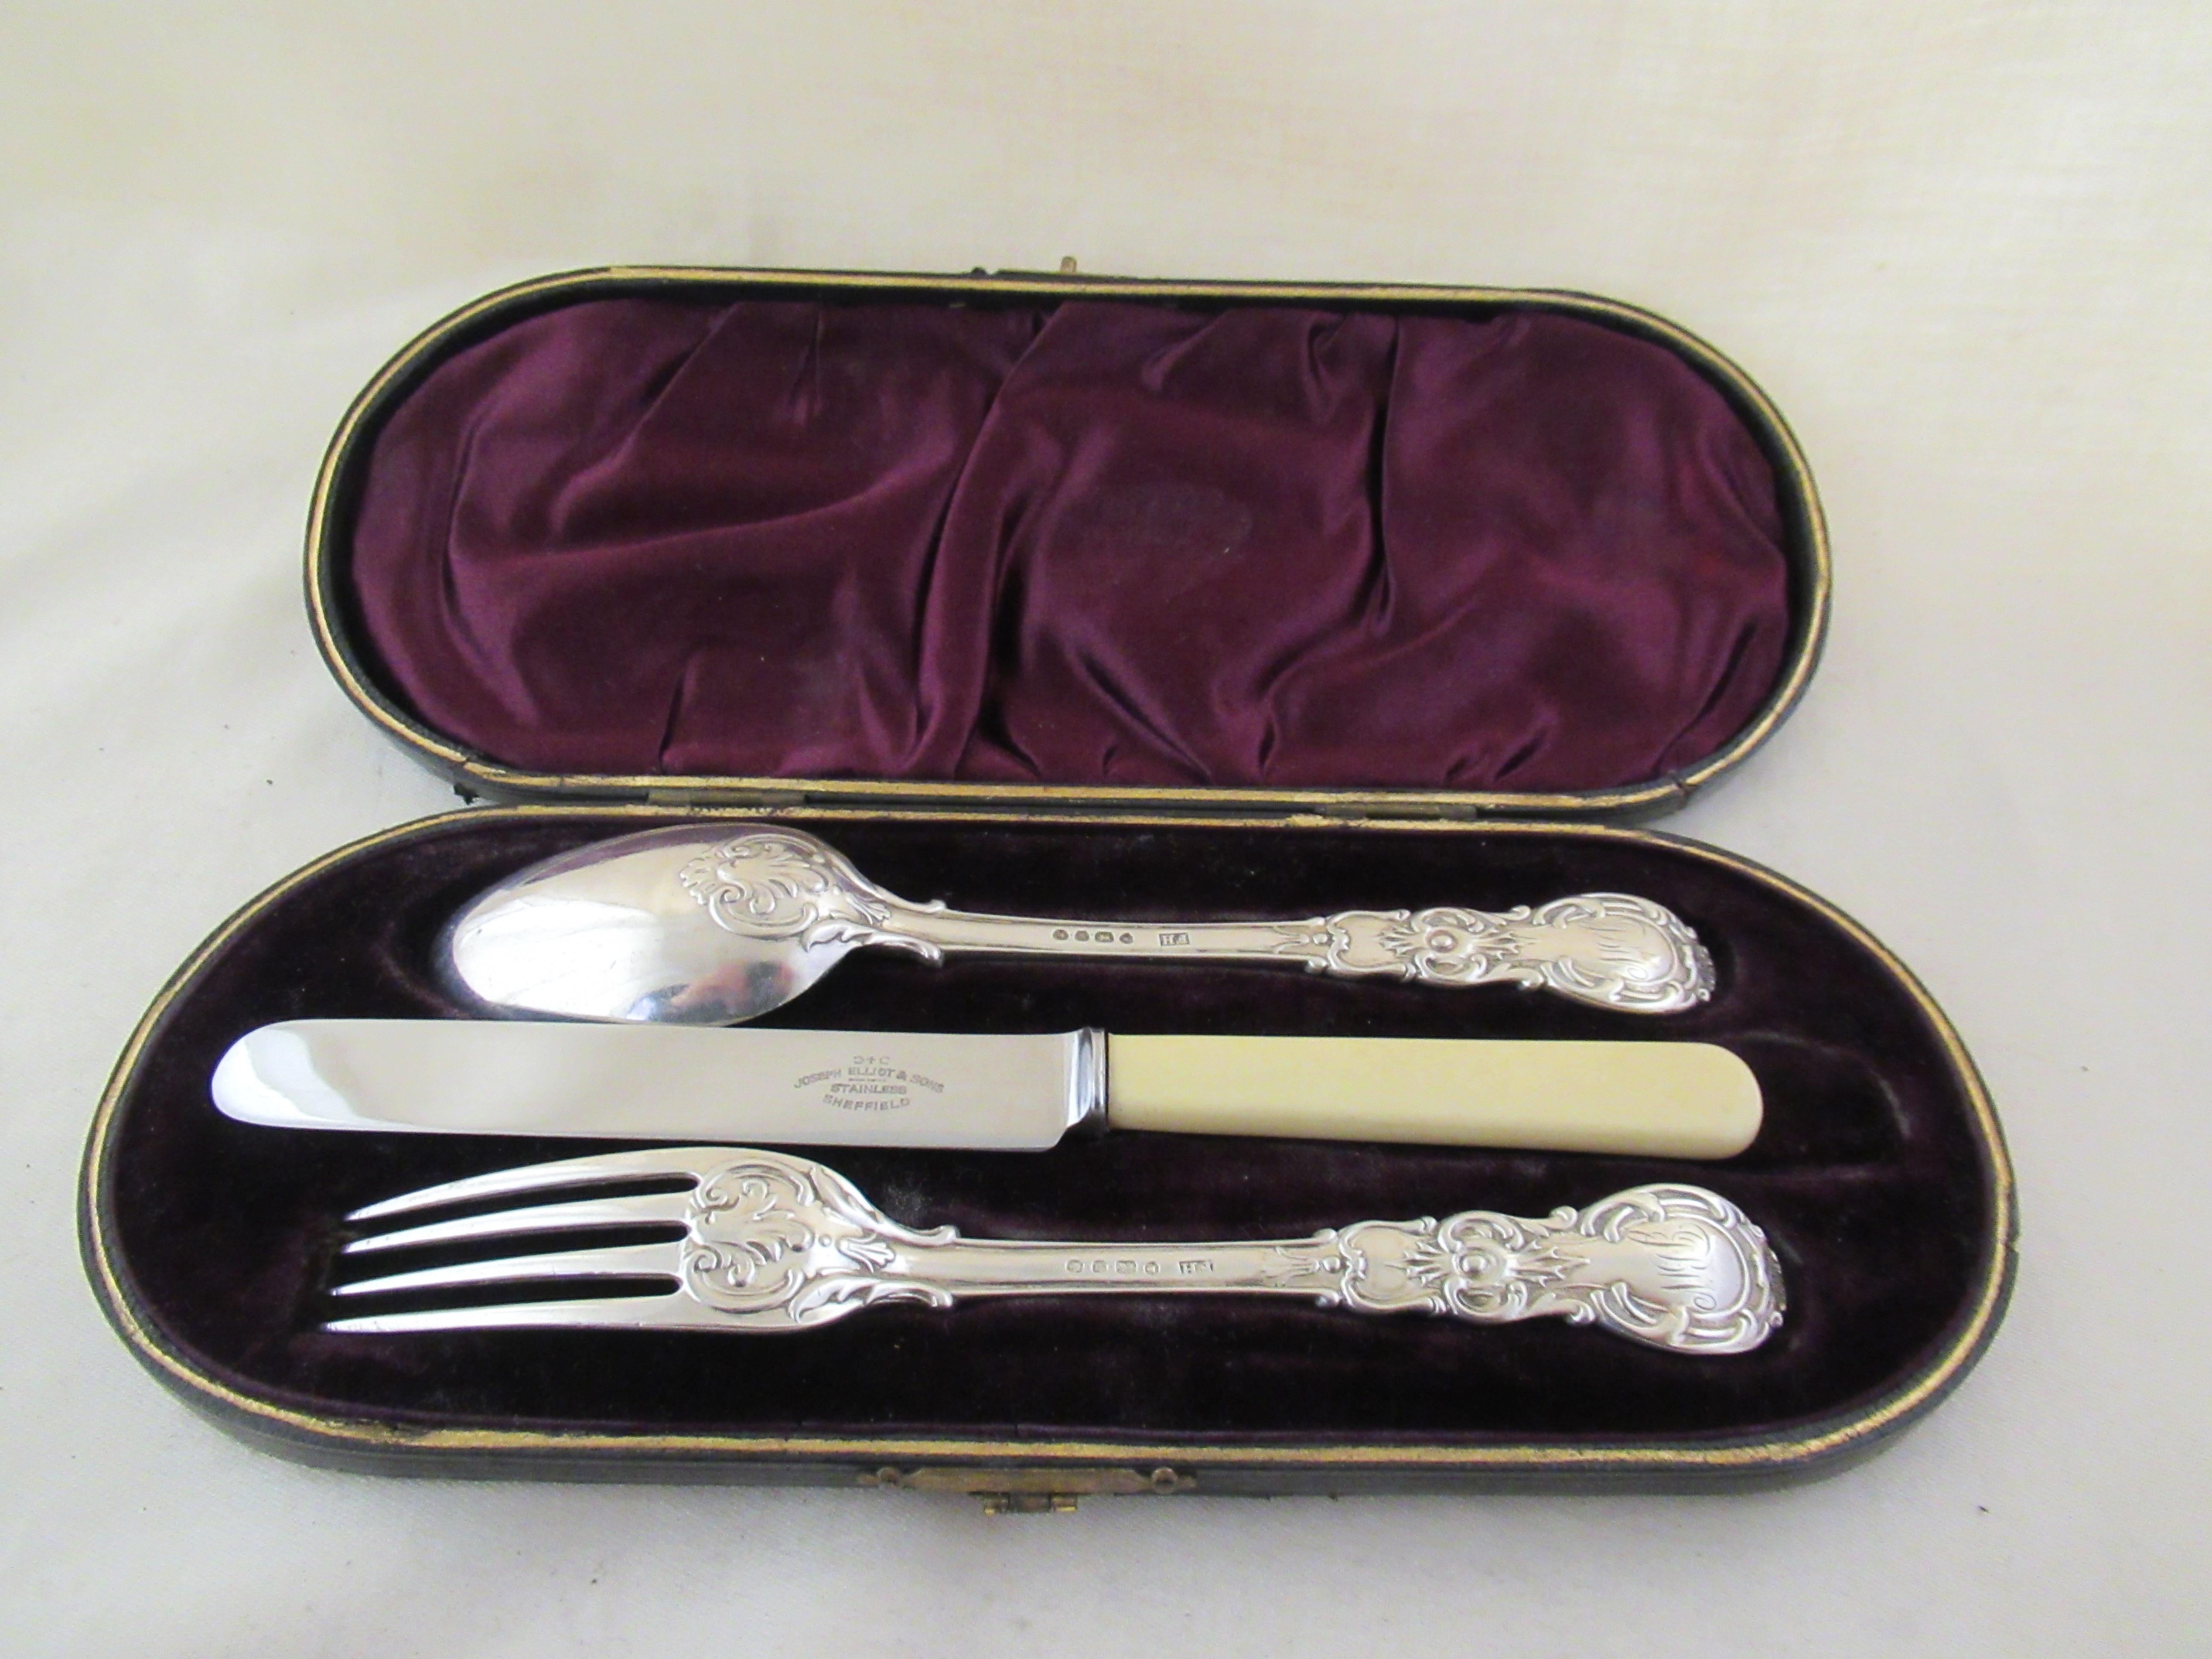 Sterling silver knife, fork & spoon christening set.
The silver fork and spoon are stamped with a full English hallmark,
 applied by the London Assay Office:-
 Queen Victoria`s Head - Duty mark (duty has been paid to the Crown).
 Upper case K -